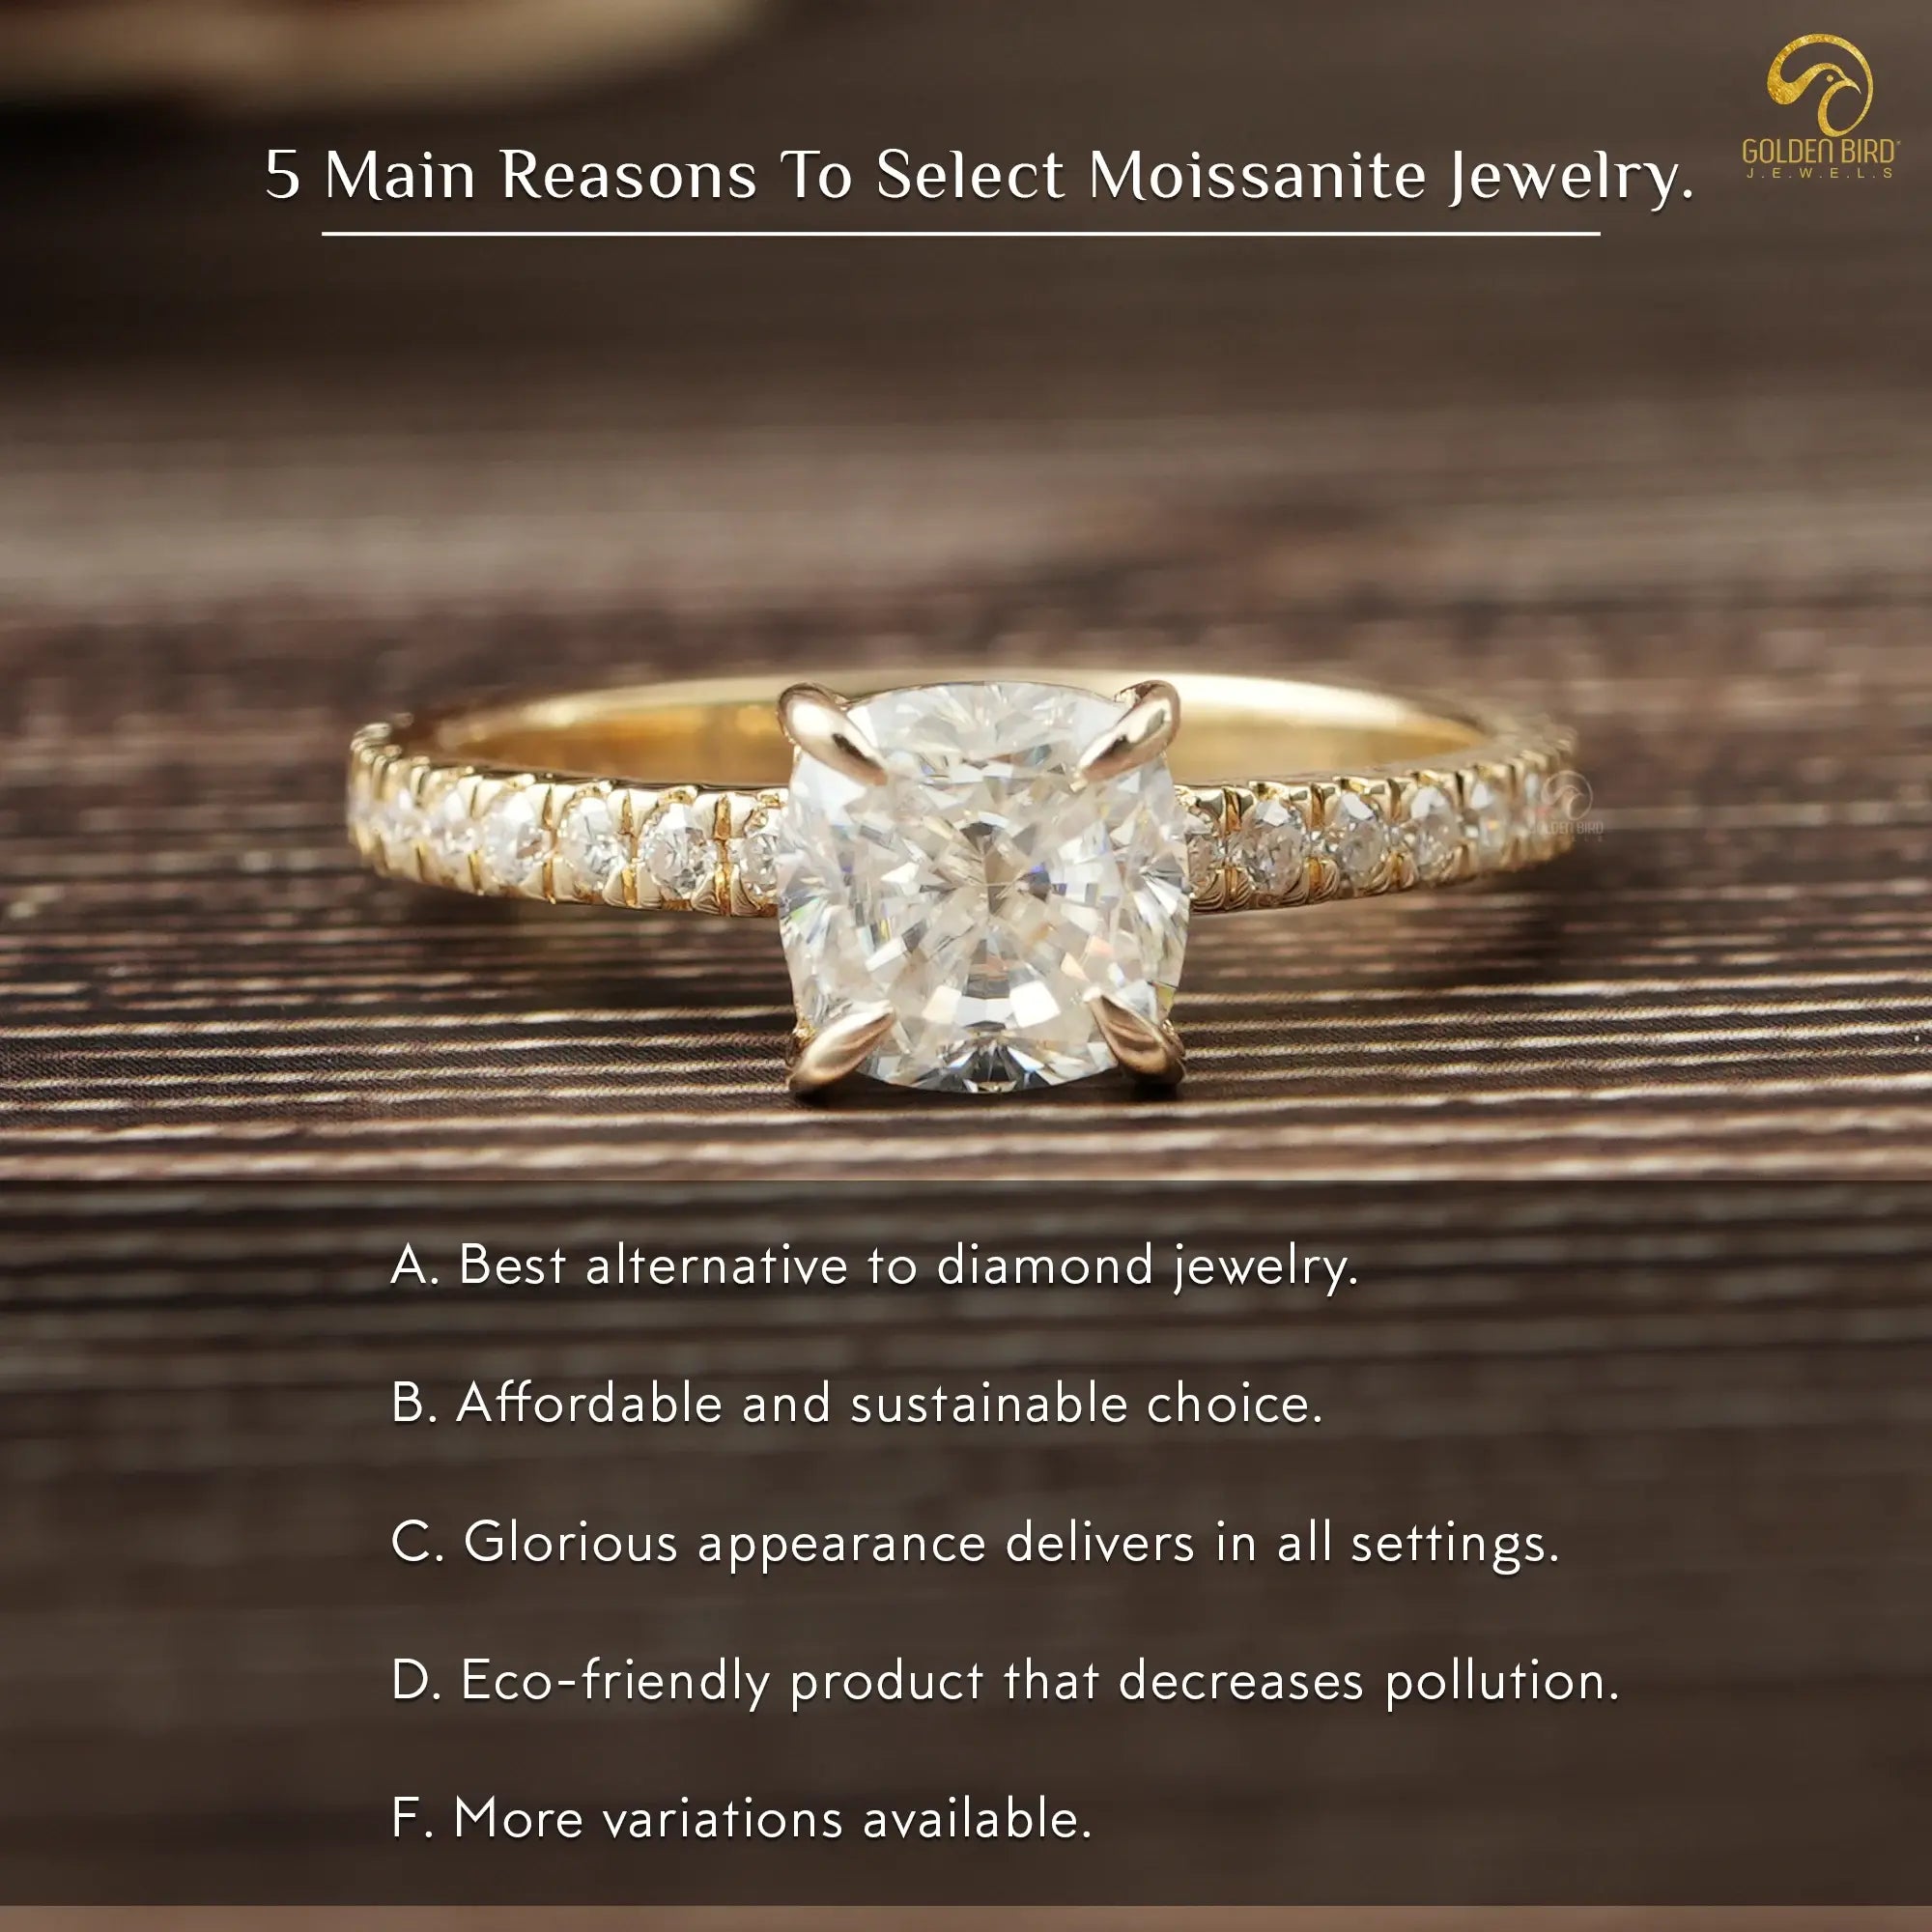 5 reasons to prefer moissanite jewelry as anniversary present for spouse